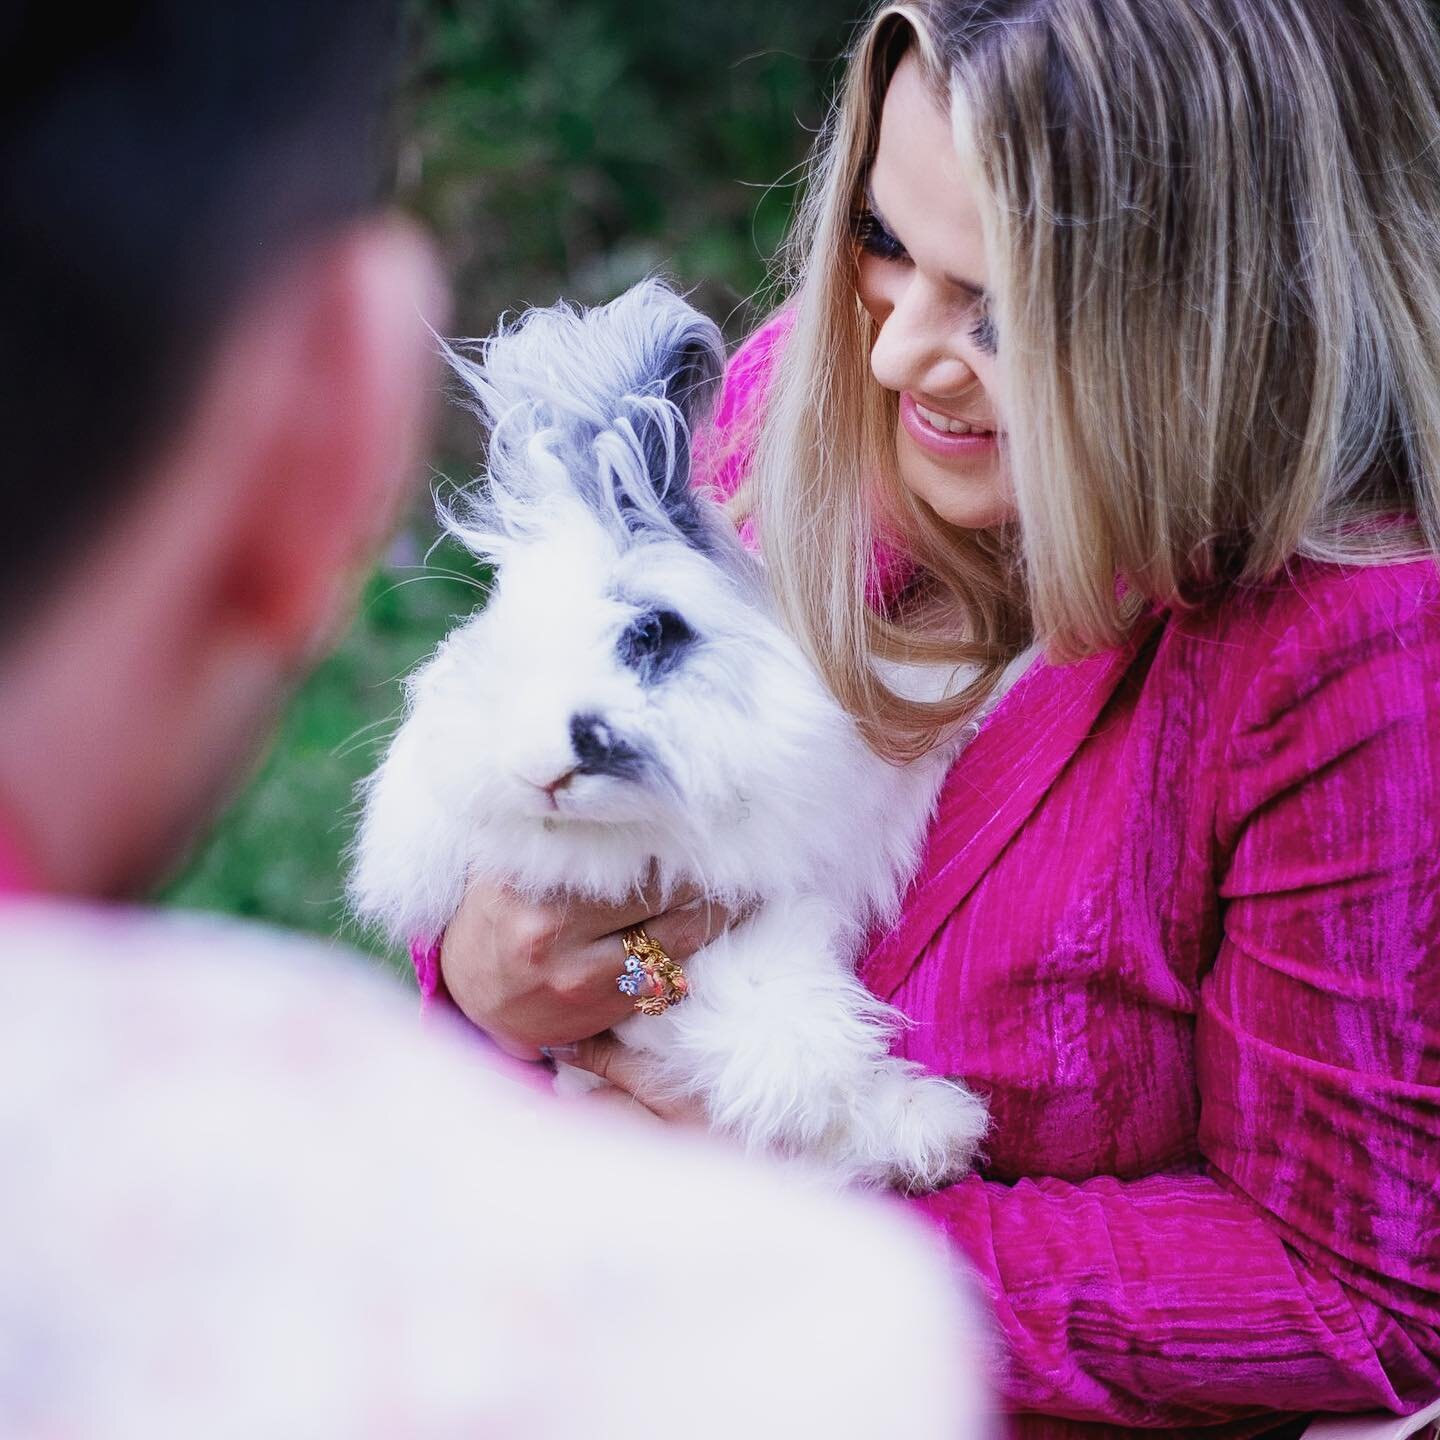 We had a ton of talent on set for the &lsquo;Stupid&rsquo; music video.... I have to admit though, @a_bunny_named_barnaby was an extra special treat! HE&rsquo;S SO FLUFFY!!!! 

Are you guys ready to see this video tomorrow?!?